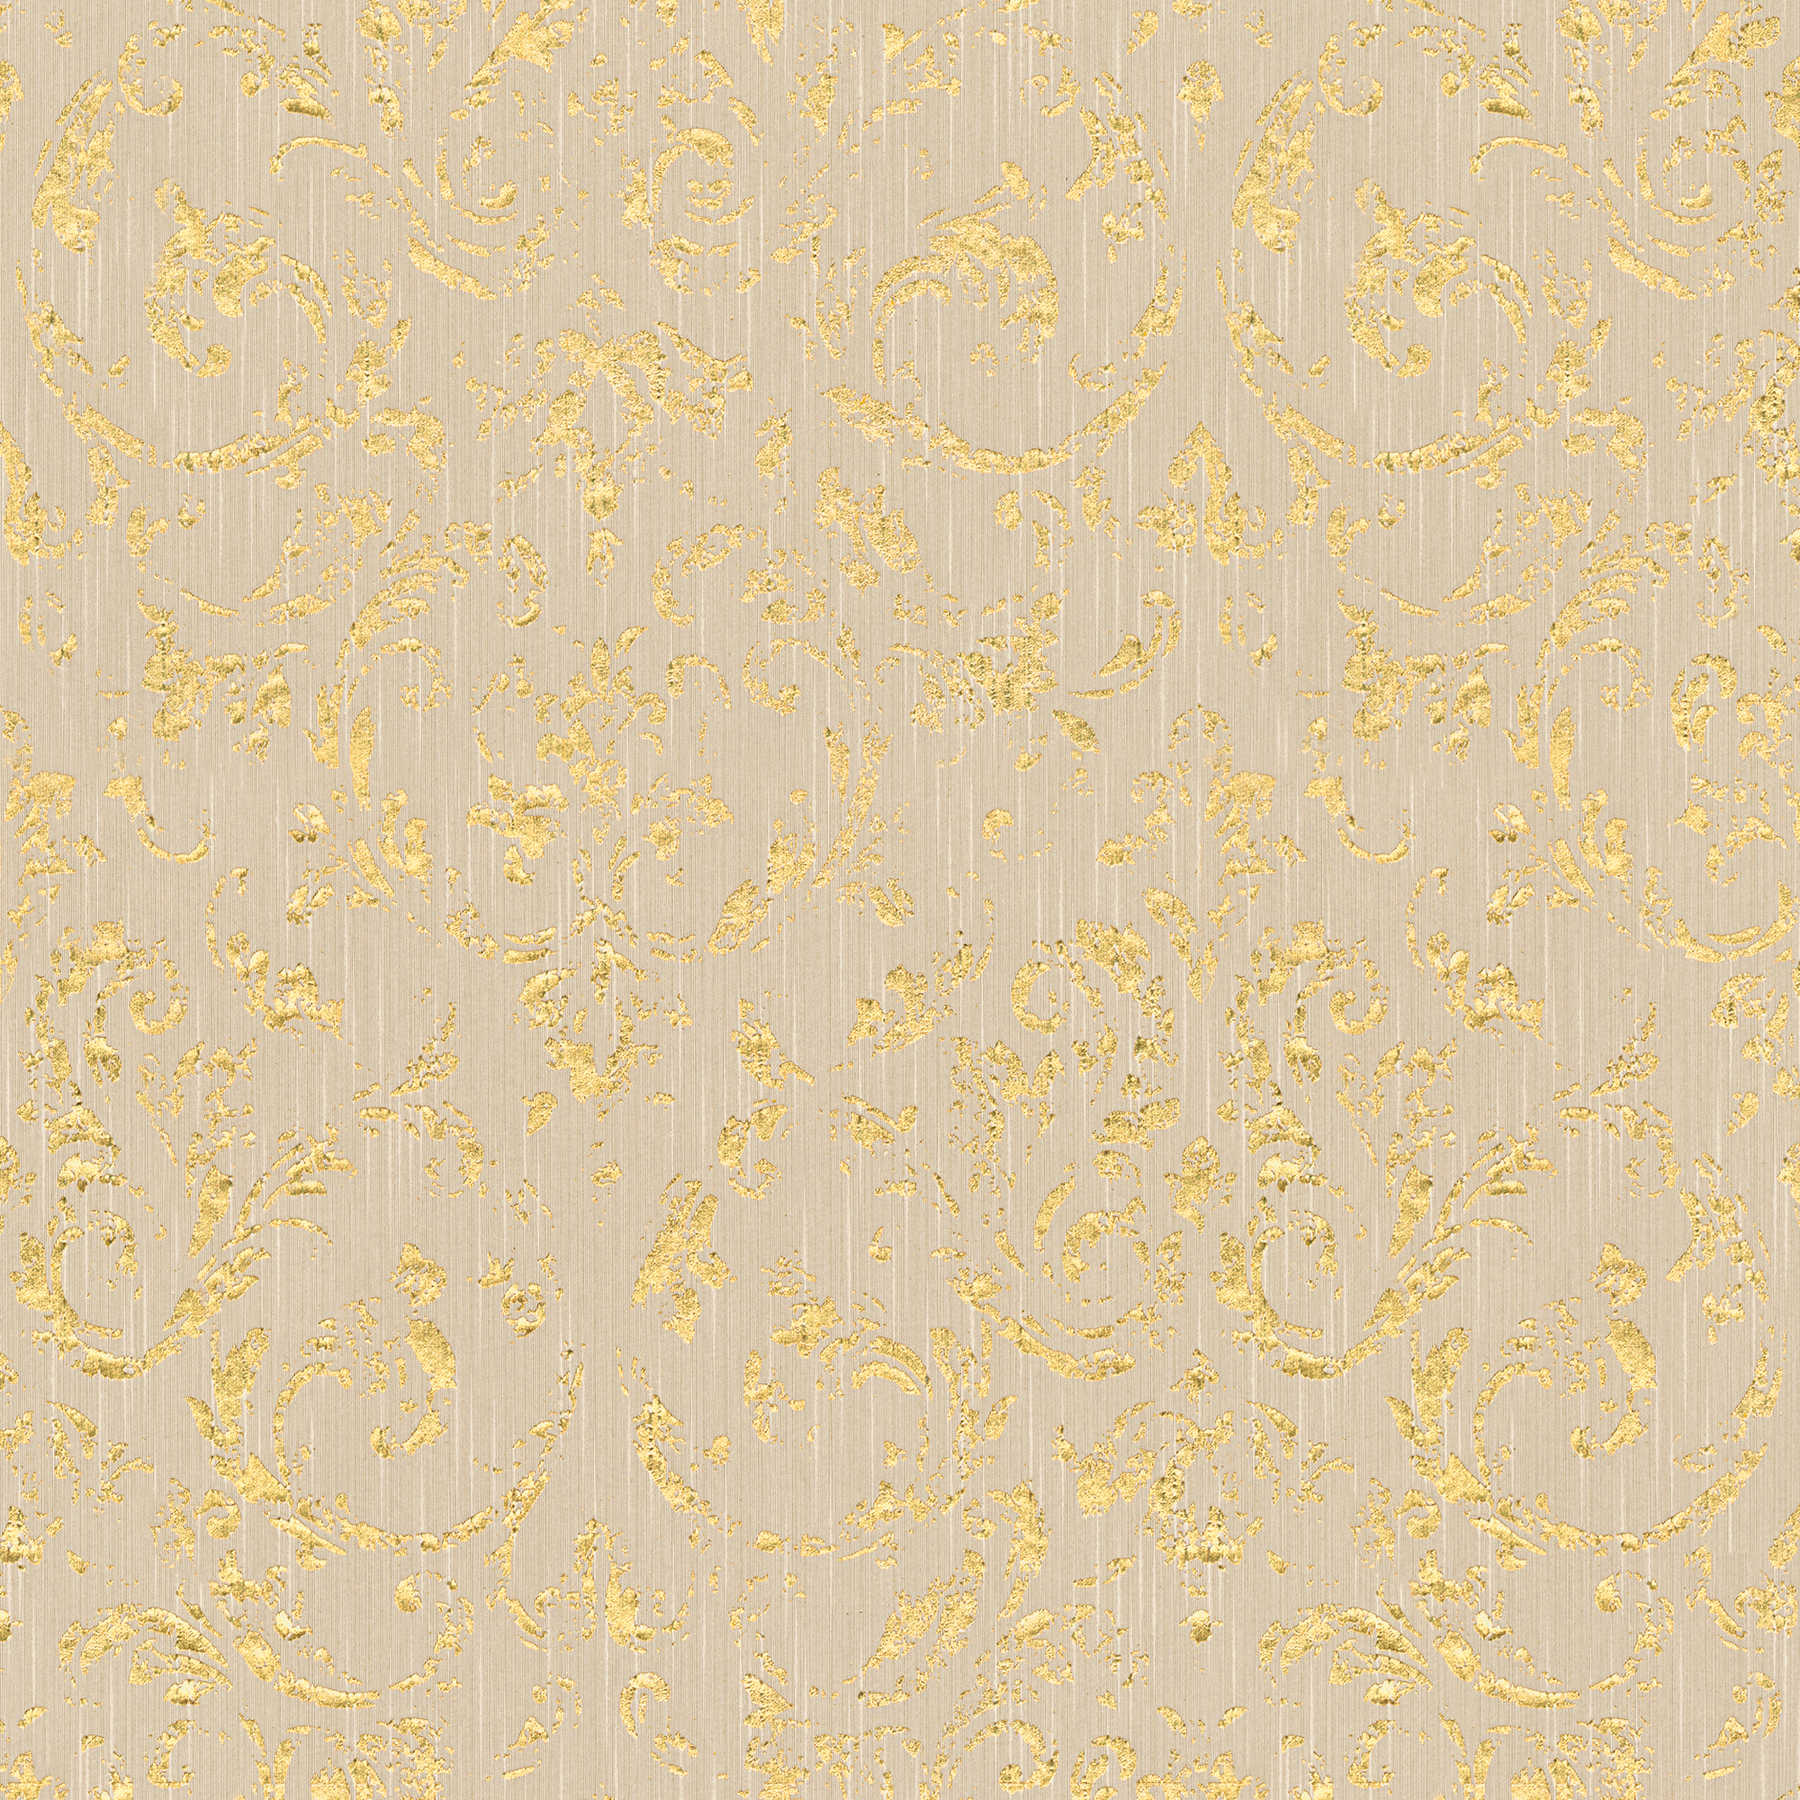 Ornament wallpaper in used look with metallic effect - beige, gold
